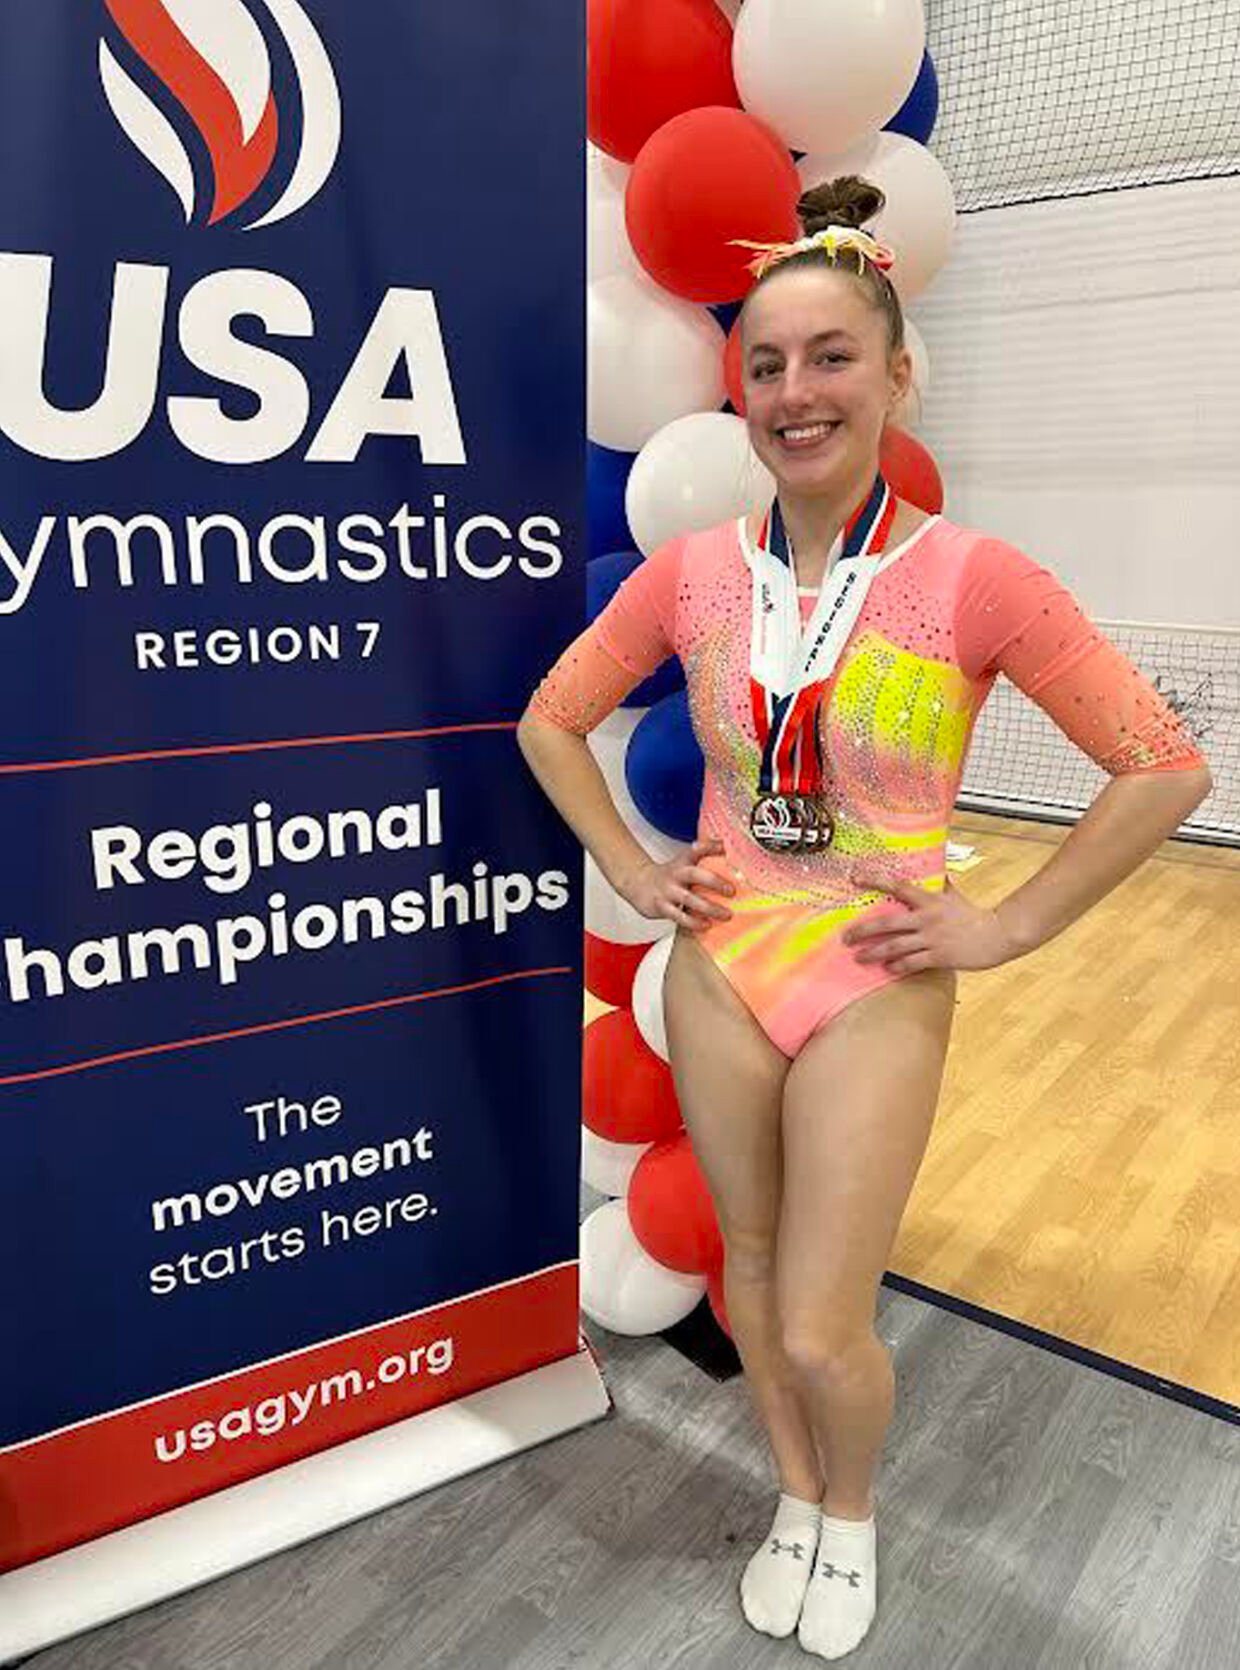 Kwiat and Gierlach advance to gymnastic nationals